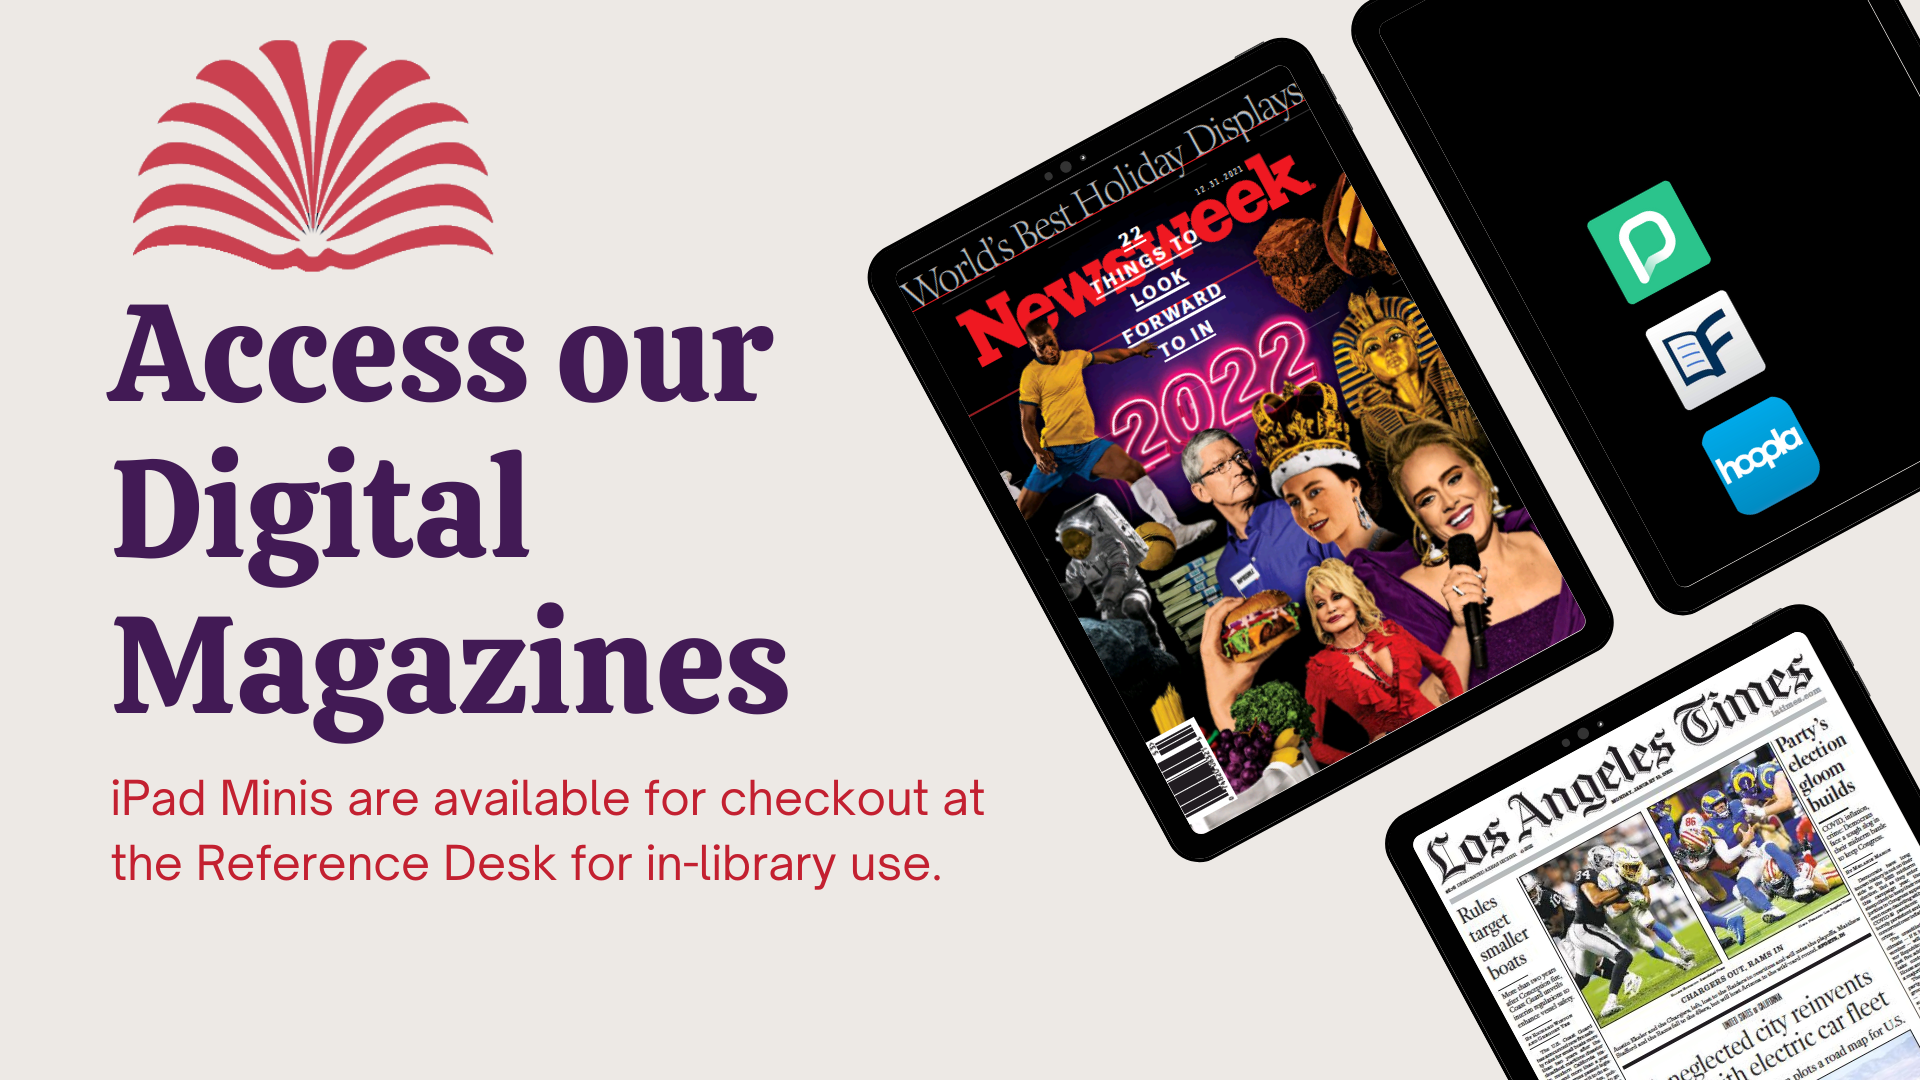 Access our Digital Magazines